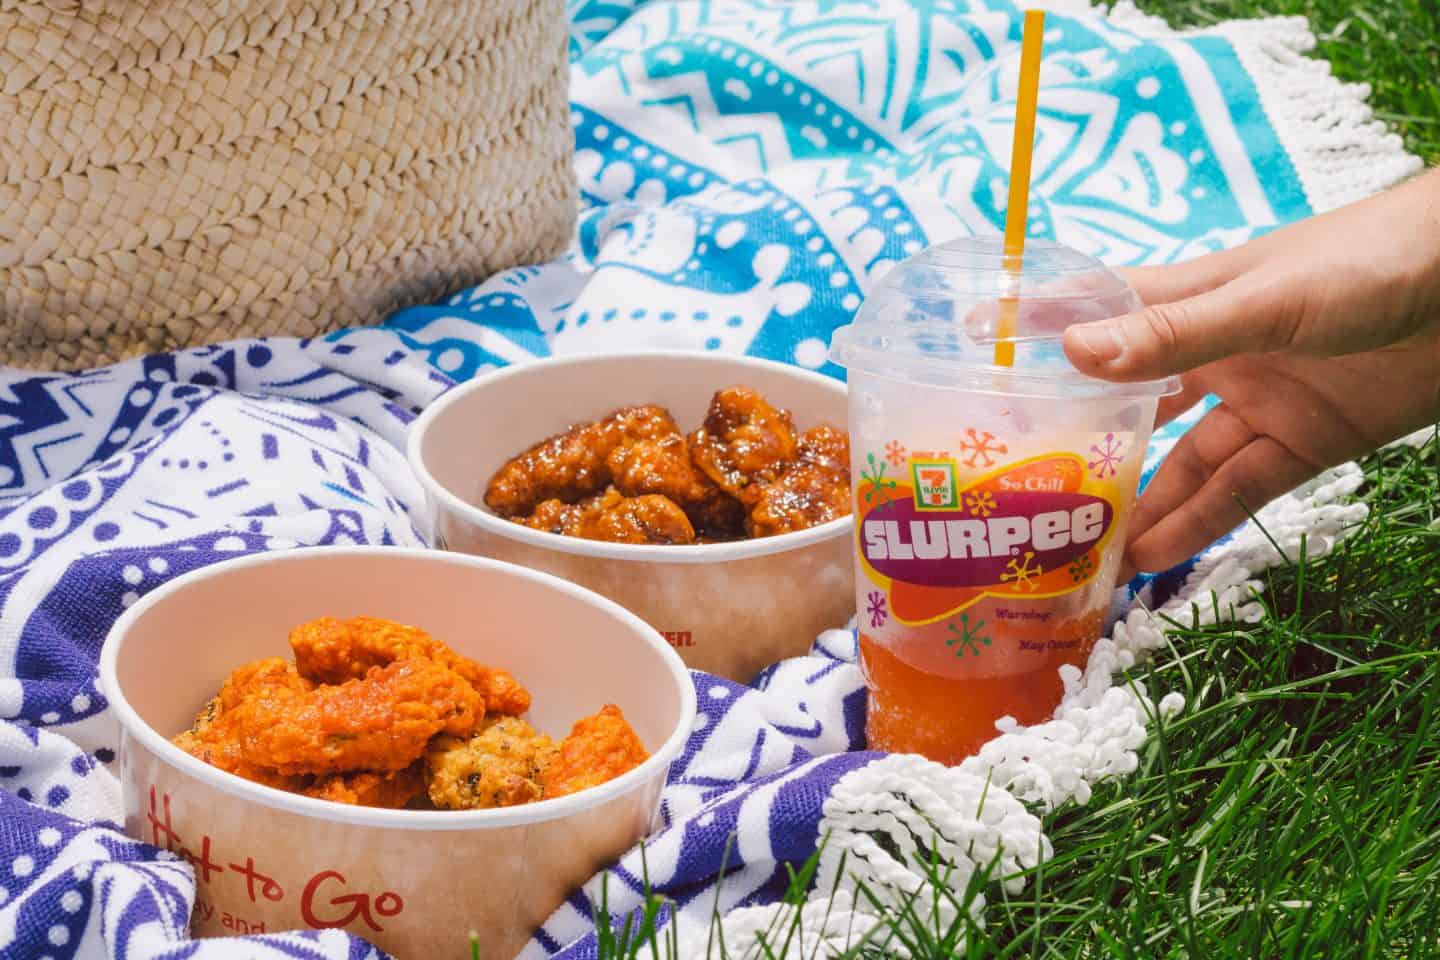 Chicken wings and Slurpee at 7-Eleven Canada